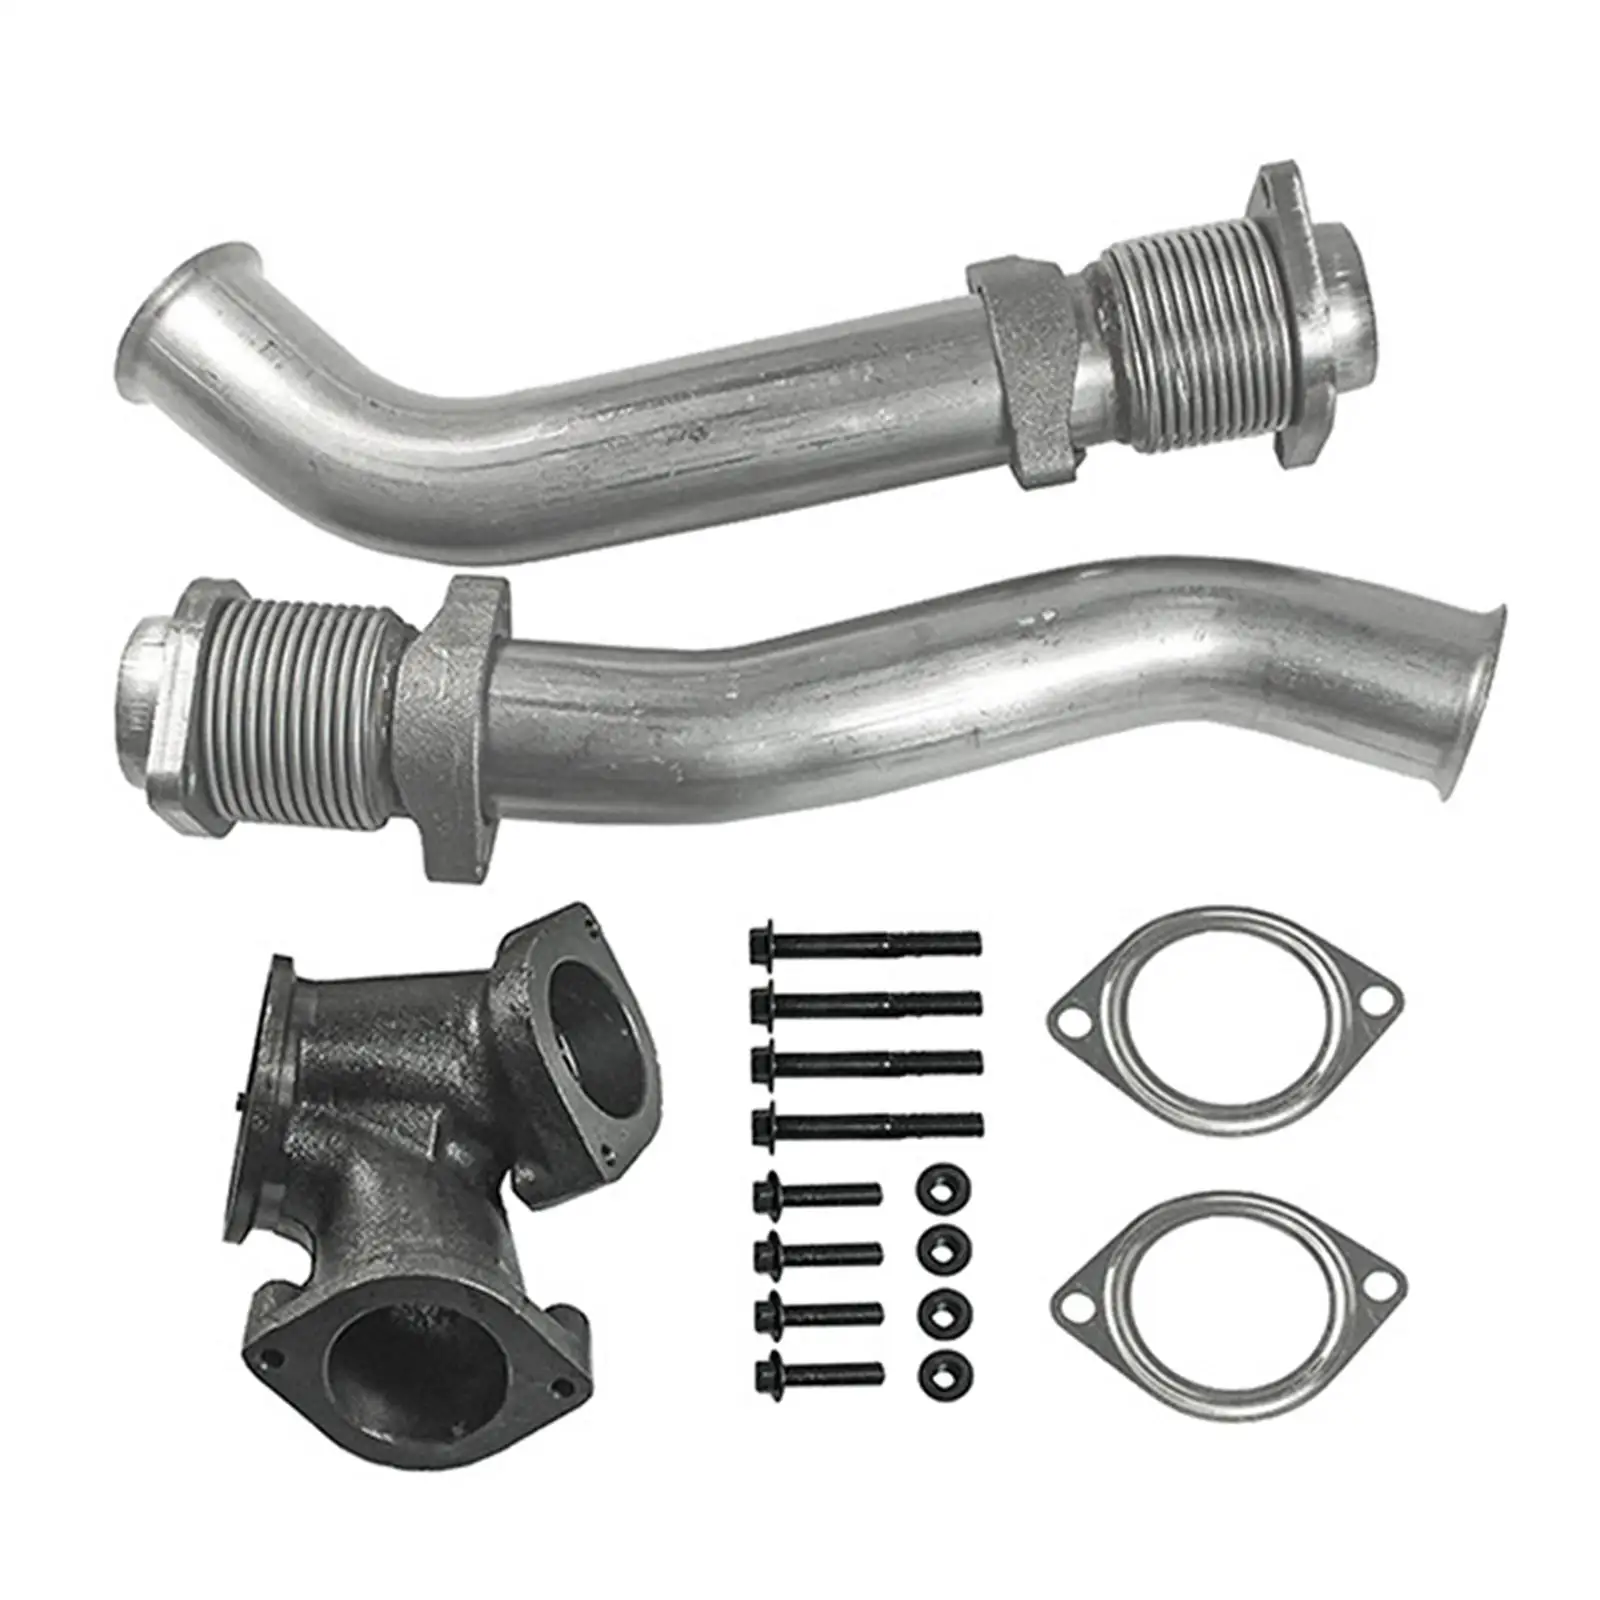 Turbocharger up Pipe Kit 679-005 Engine Parts for Ford F-250 F-550